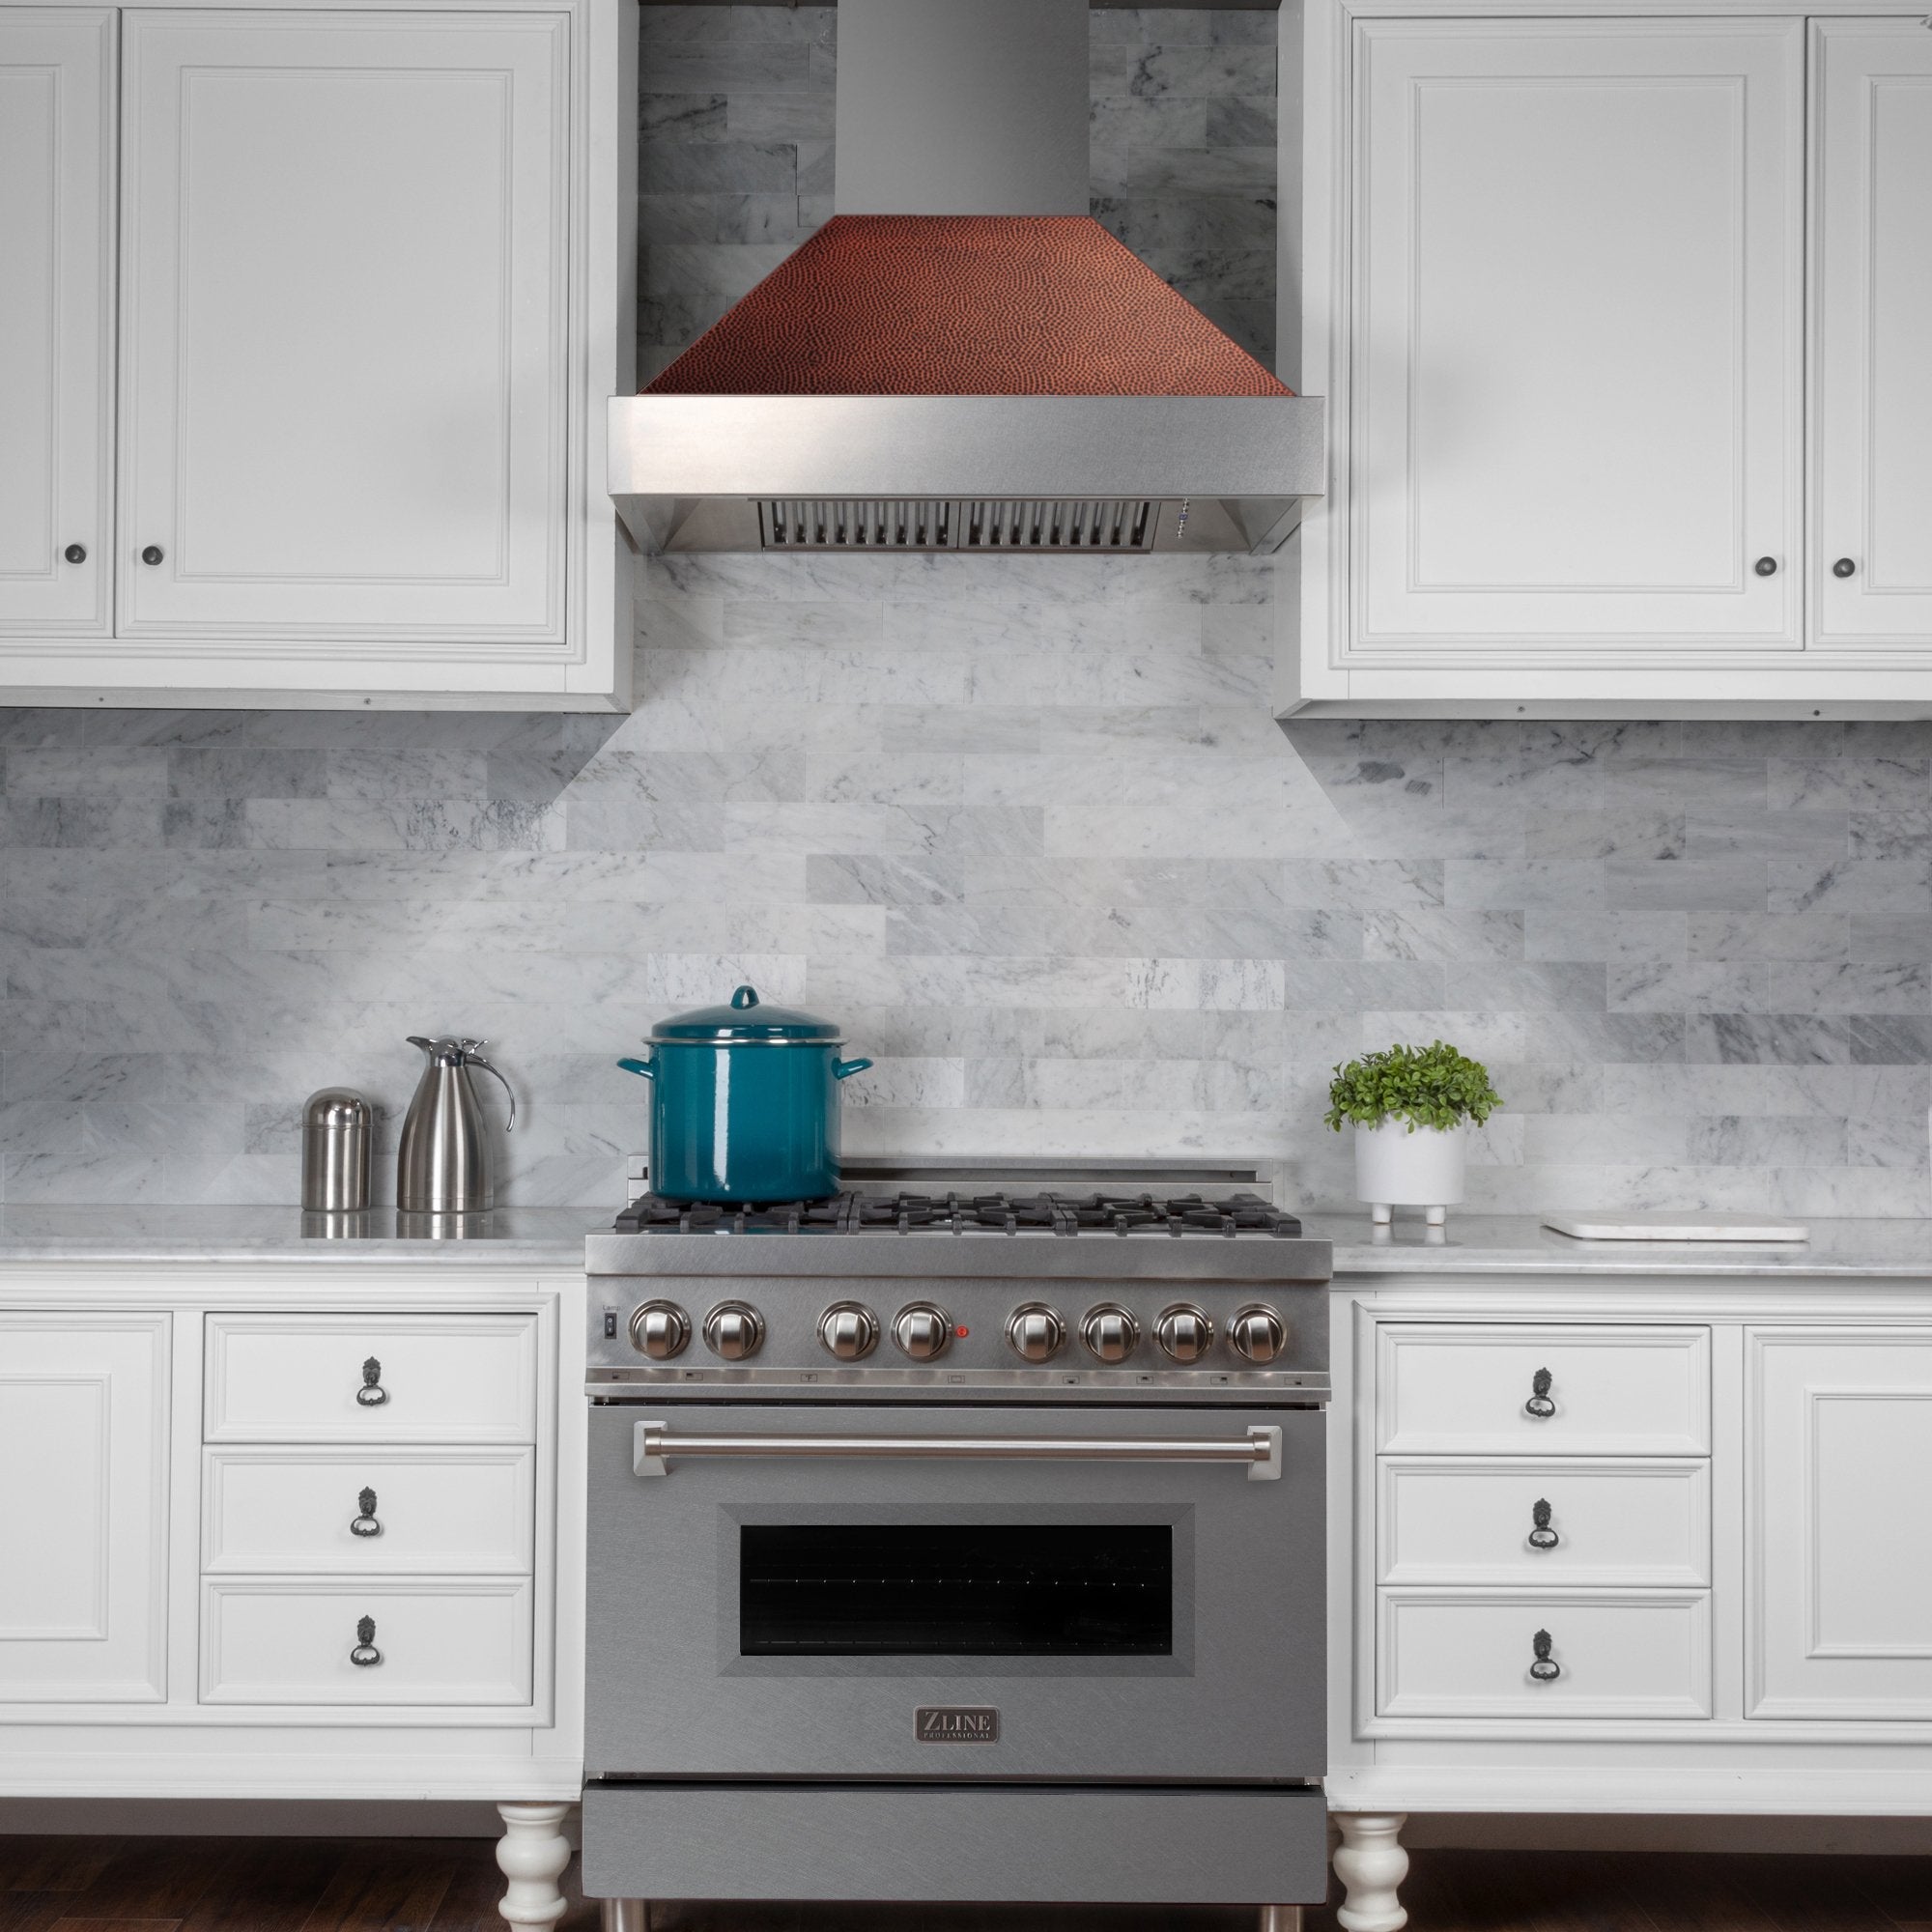 ZLINE Ducted Fingerprint Resistant Stainless Steel Range Hood with Hand-Hammered Copper Shell (8654HH)